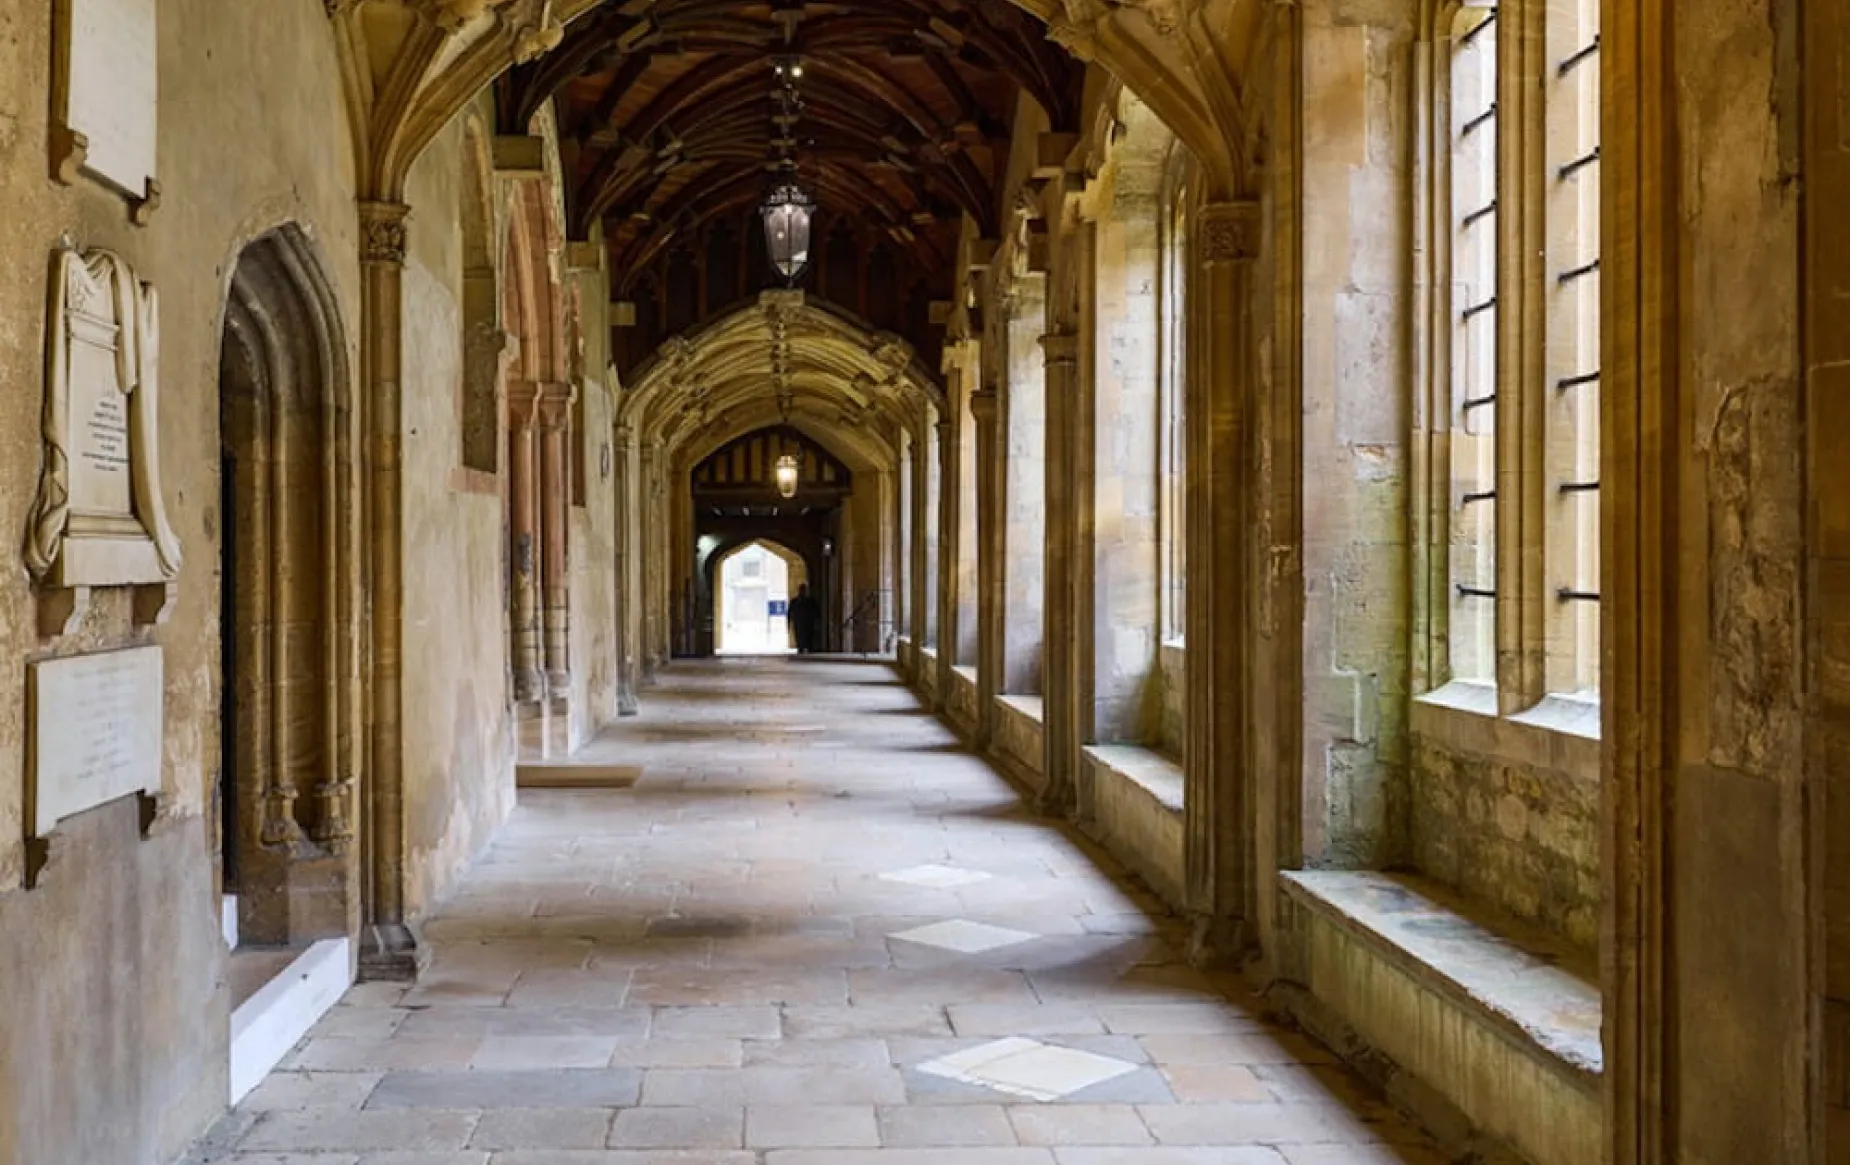 Looking down the cloisters at the Cathedral